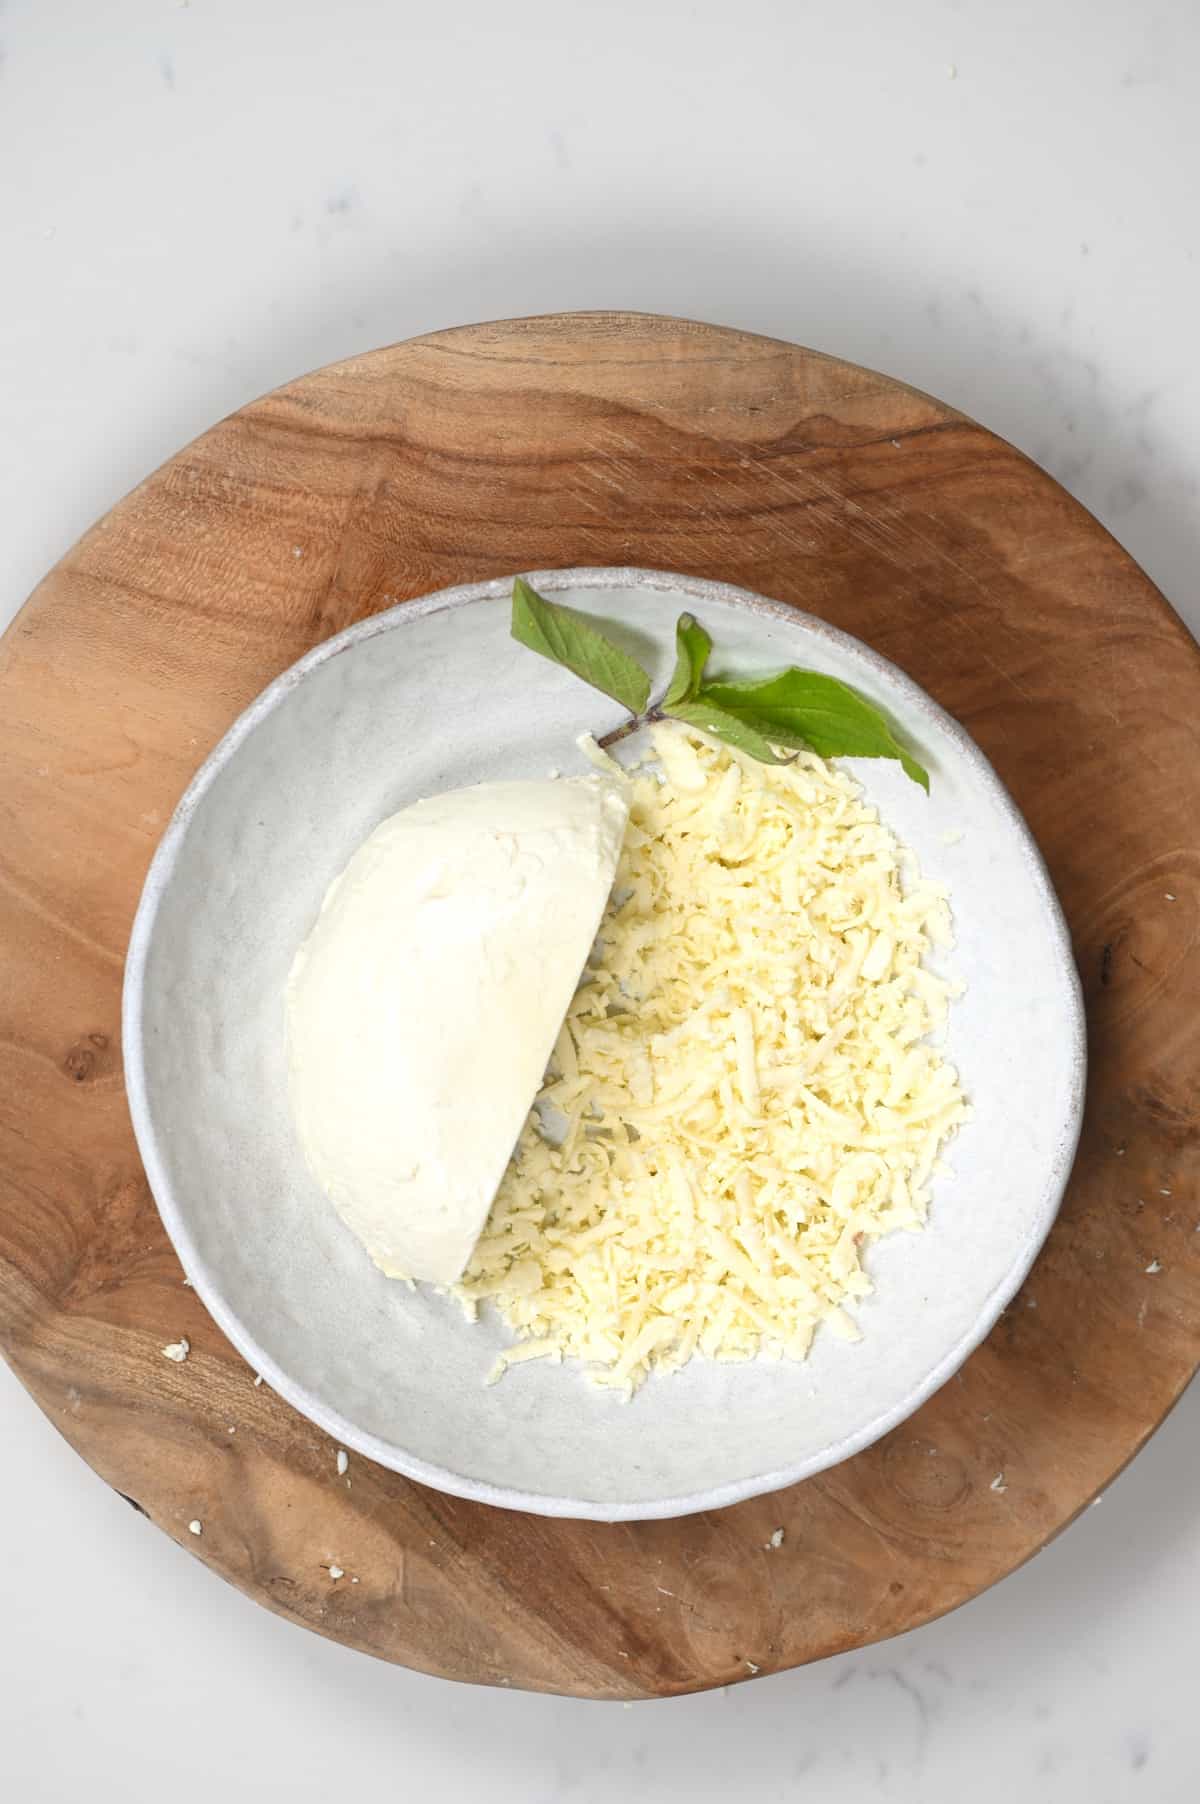 Half-grated mozzarella cheese in a bowl with a mint leaf